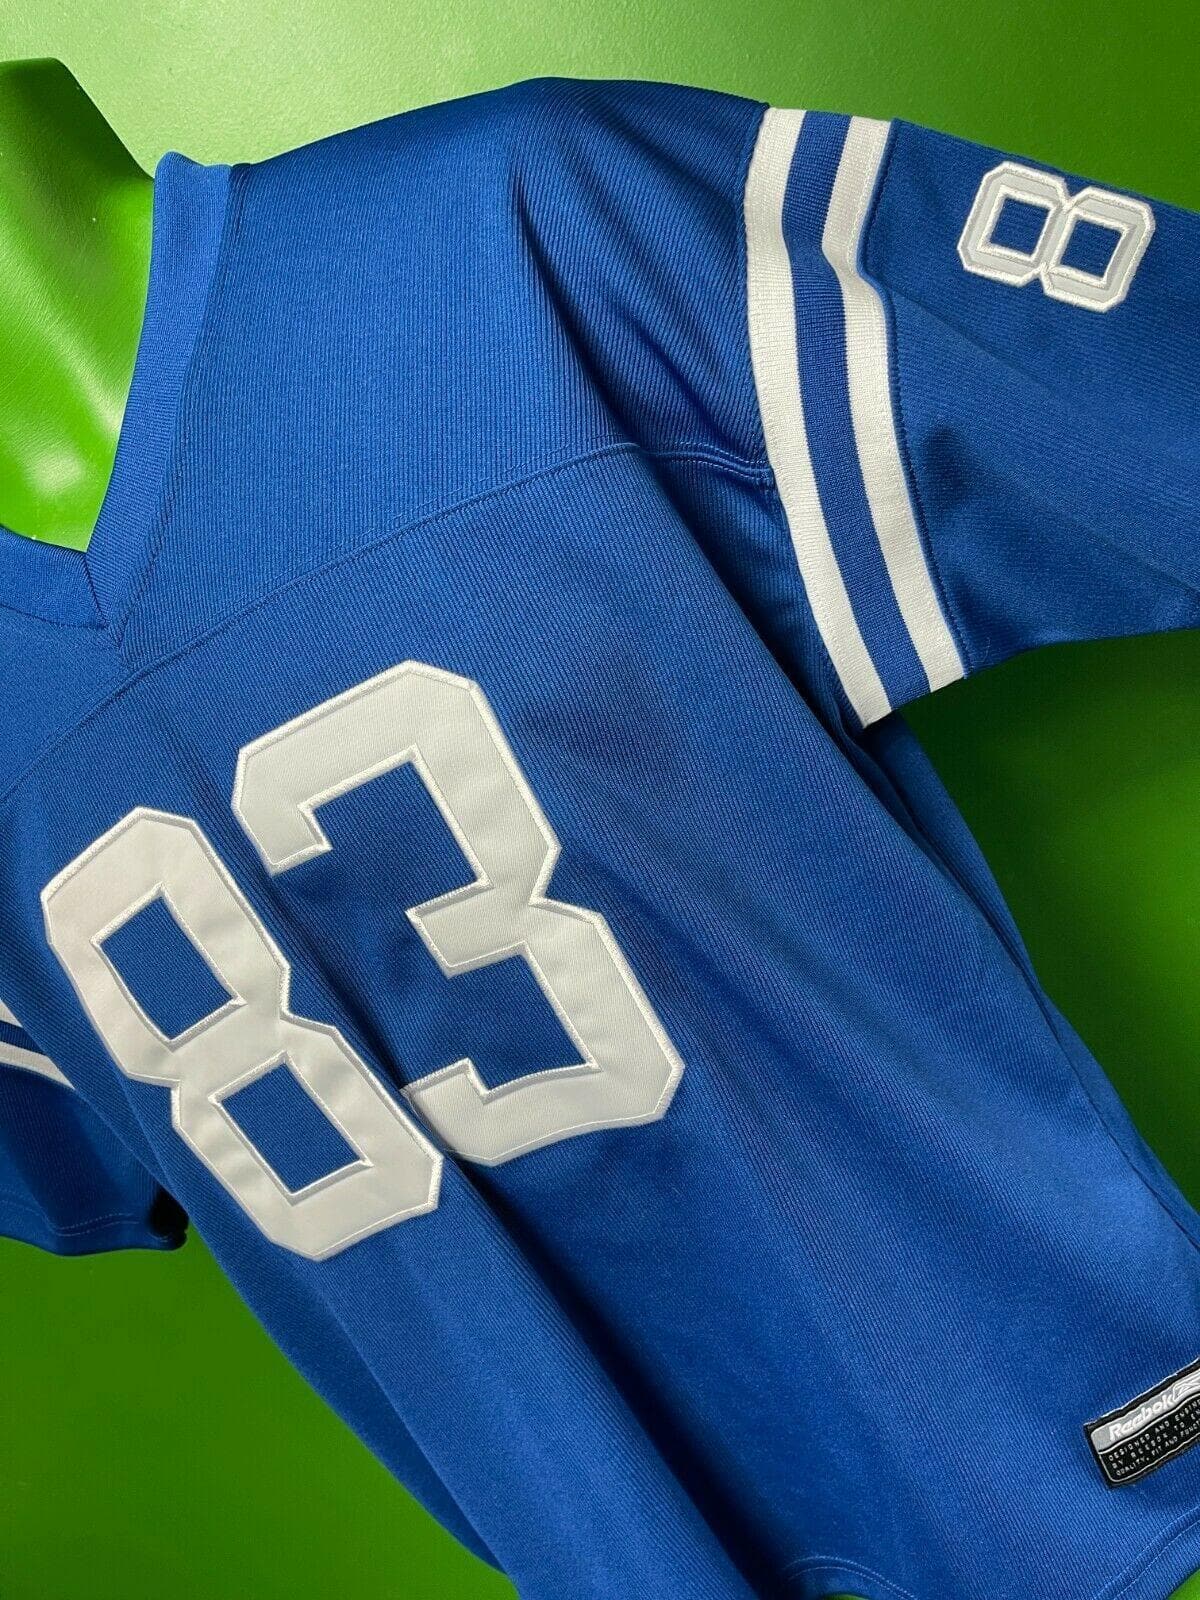 NFL Indianapolis Colts Stokley #83 Reebok Stitched Jersey Youth XL